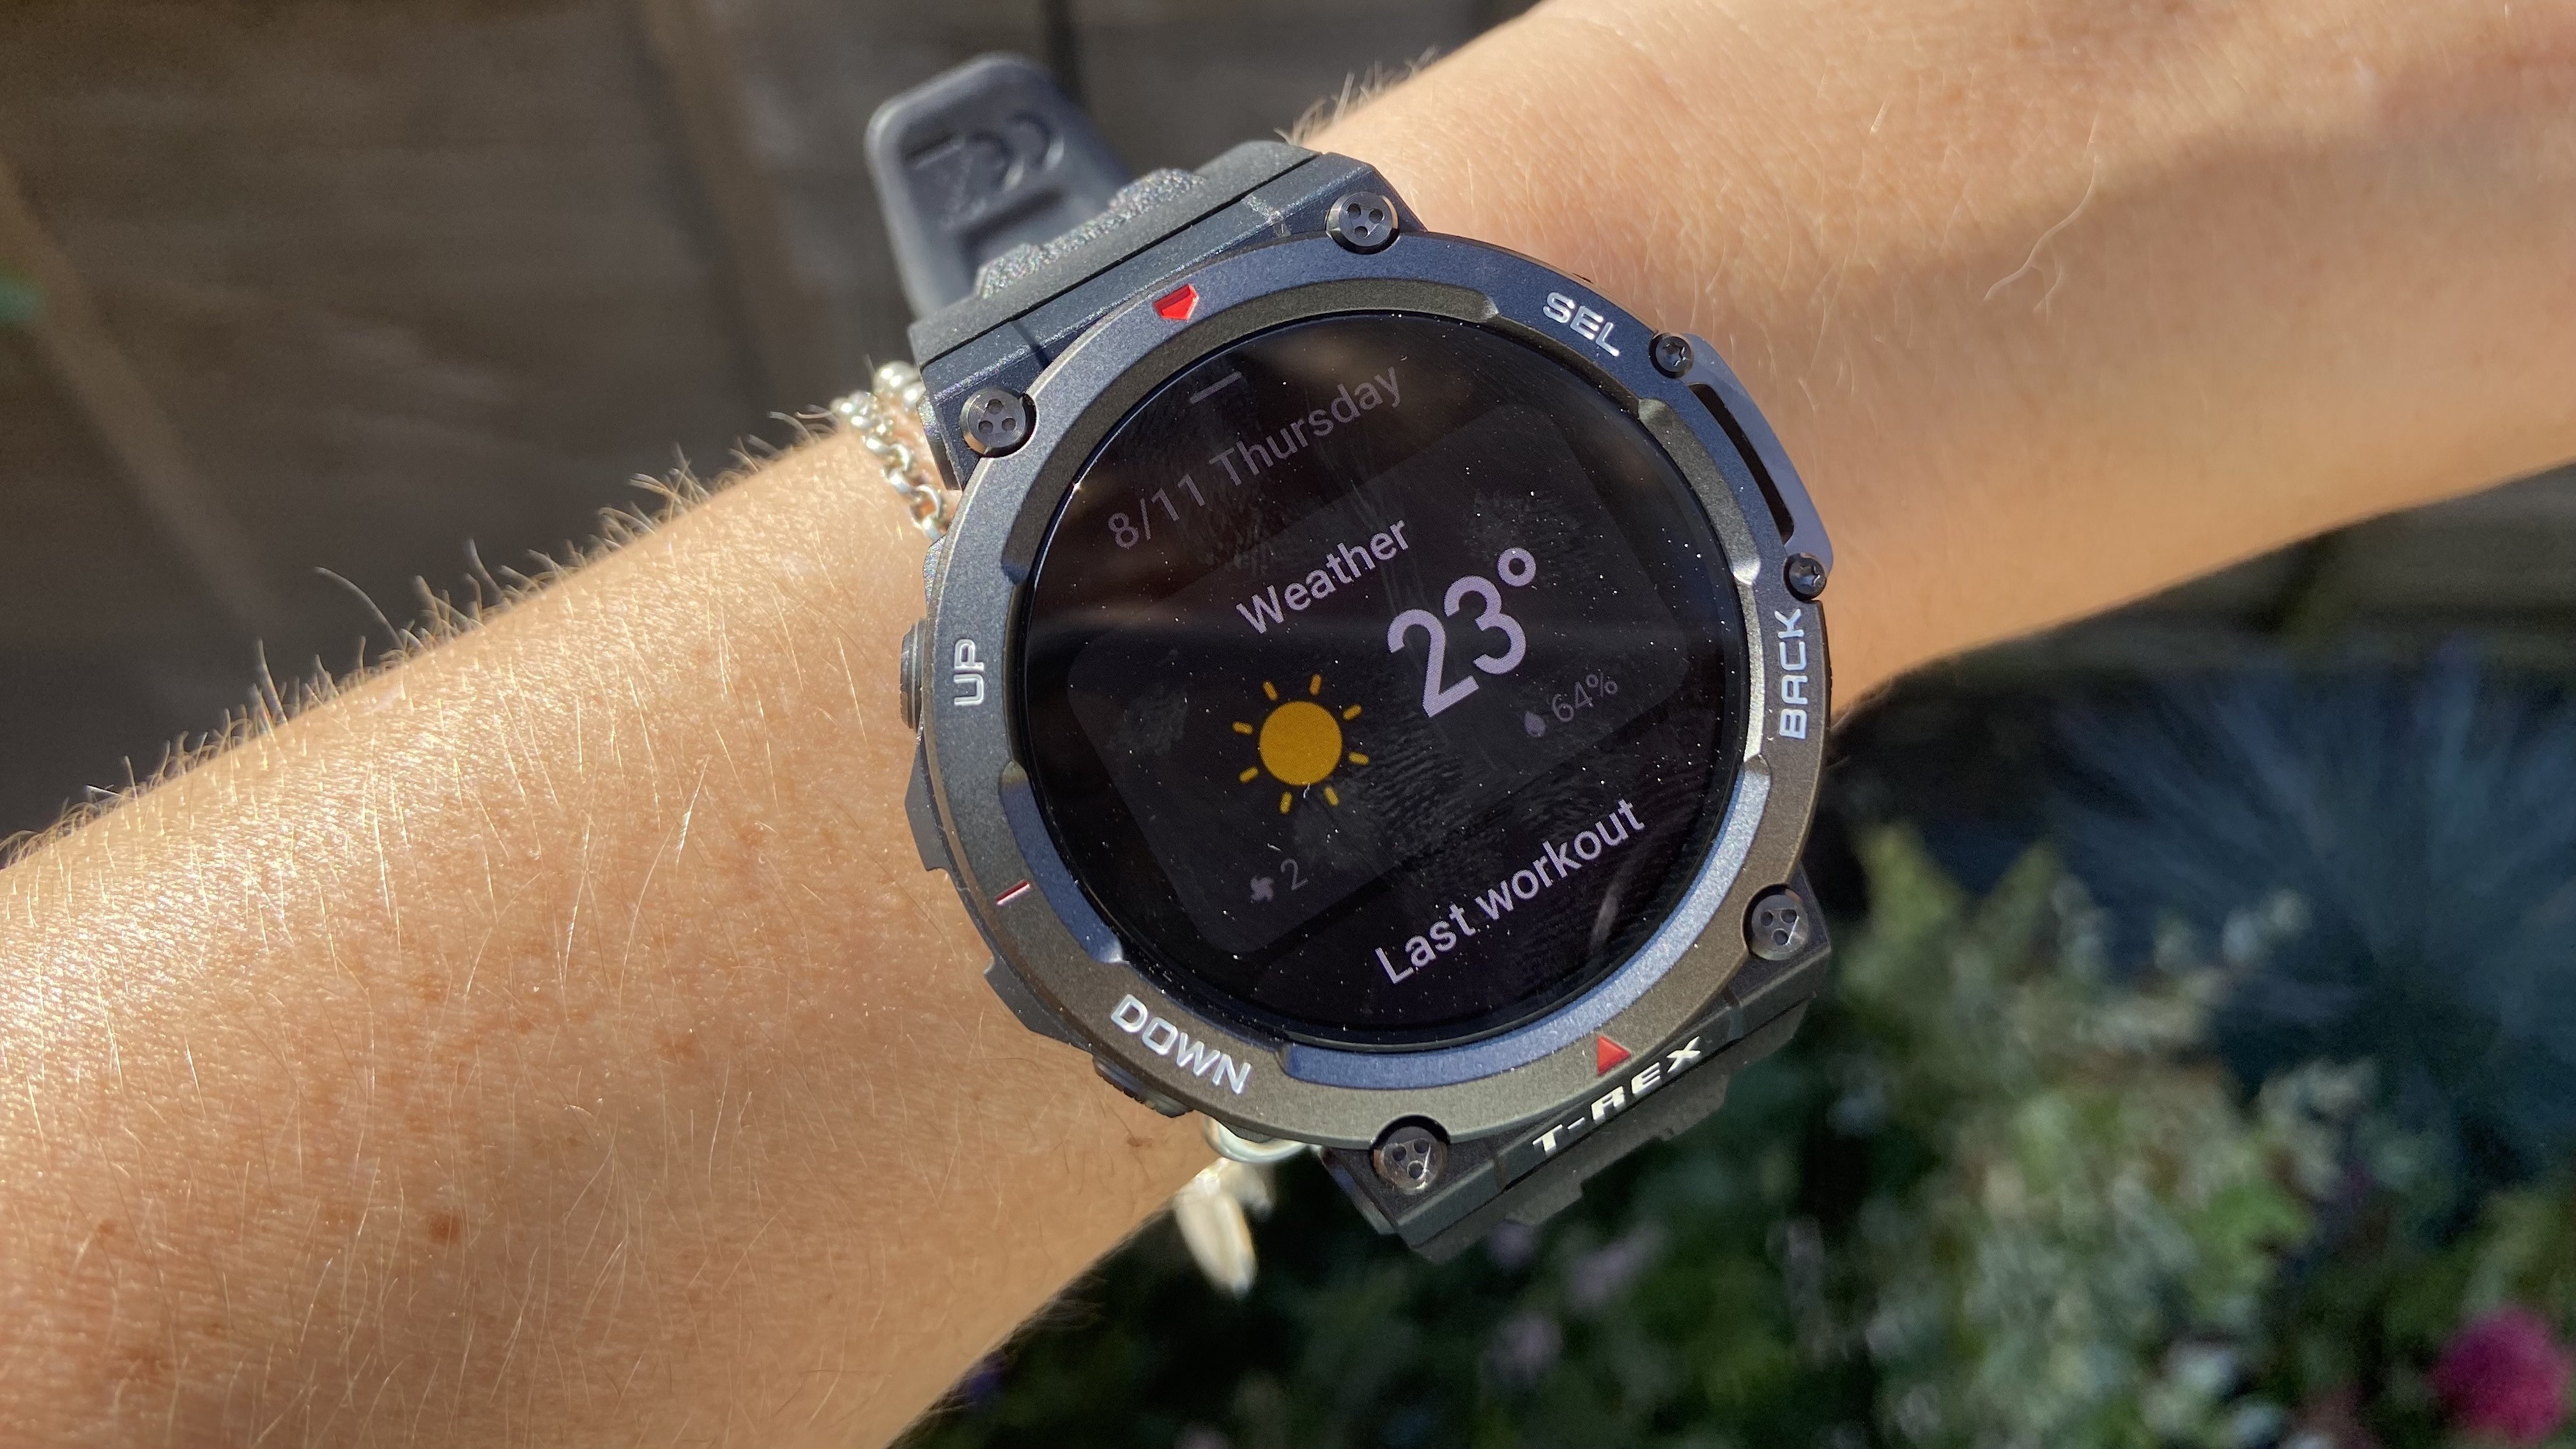 Picture of the weather screen on amazfit t rex 2